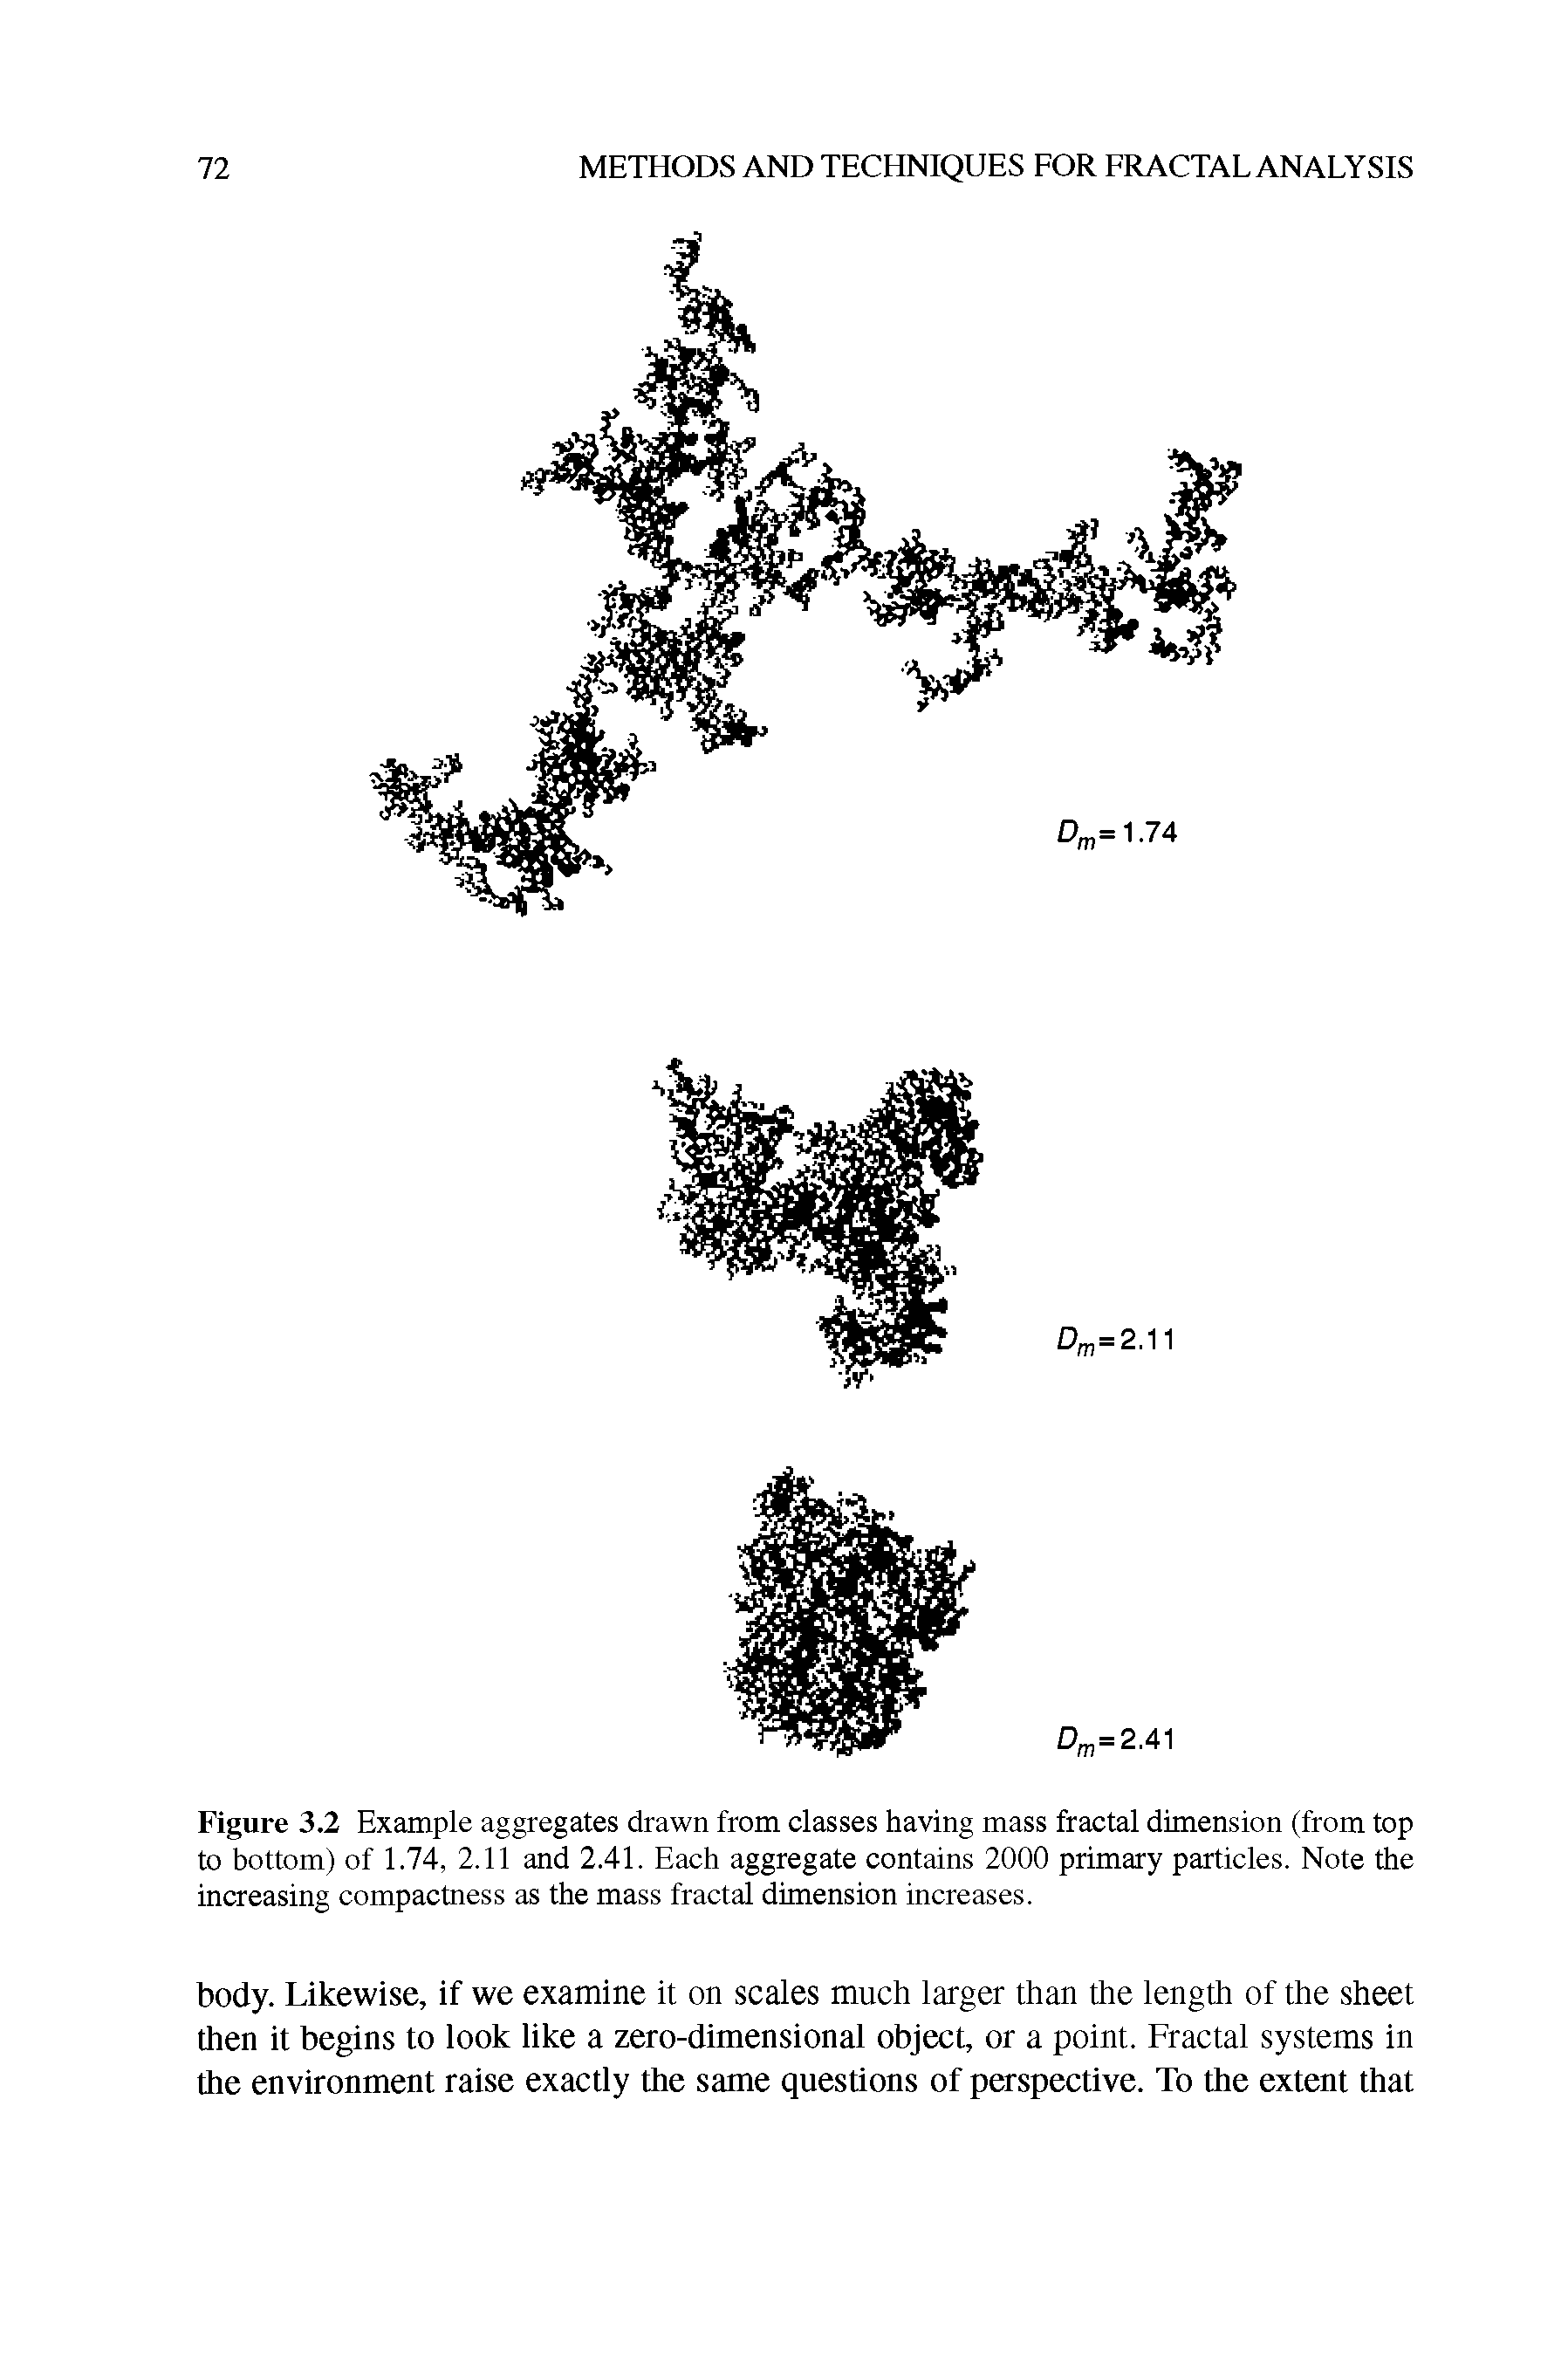 Figure 3.2 Example aggregates drawn from classes having mass fractal dimension (from top to bottom) of 1.74, 2.11 and 2.41. Each aggregate contains 2000 primary particles. Note the increasing compactness as the mass fractal dimension increases.